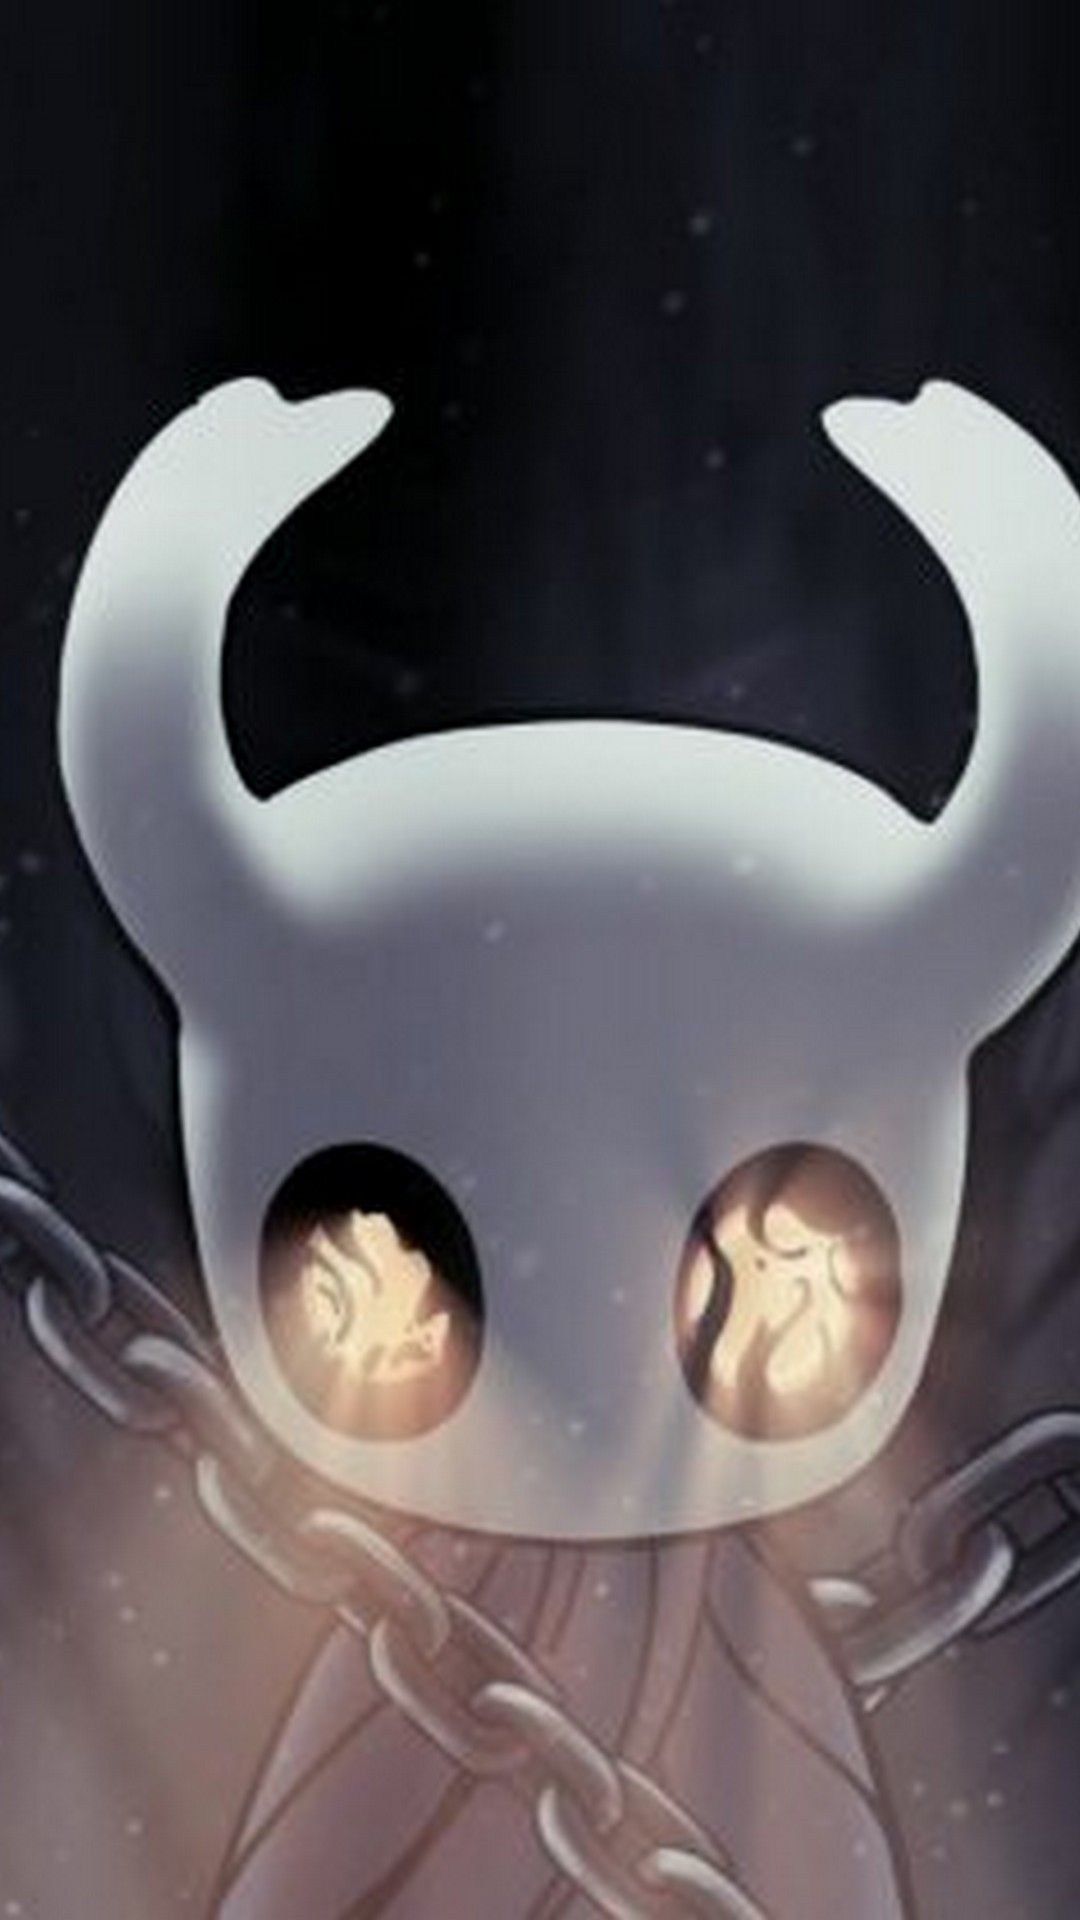 Hollow Knight iPhone X Wallpaper HD with high resolution 1080x1920